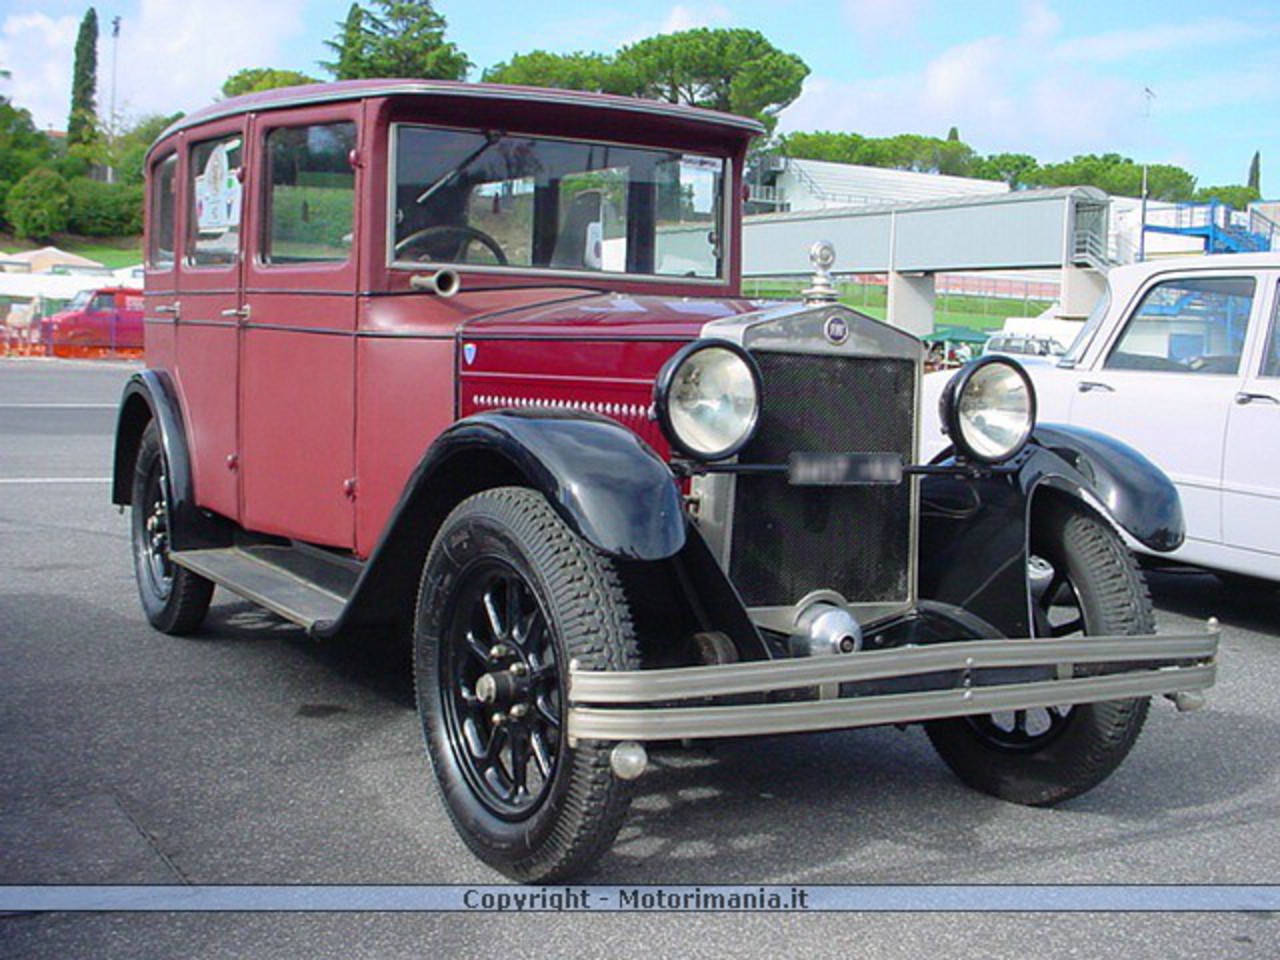 1925 Fiat 509A Wallpapers